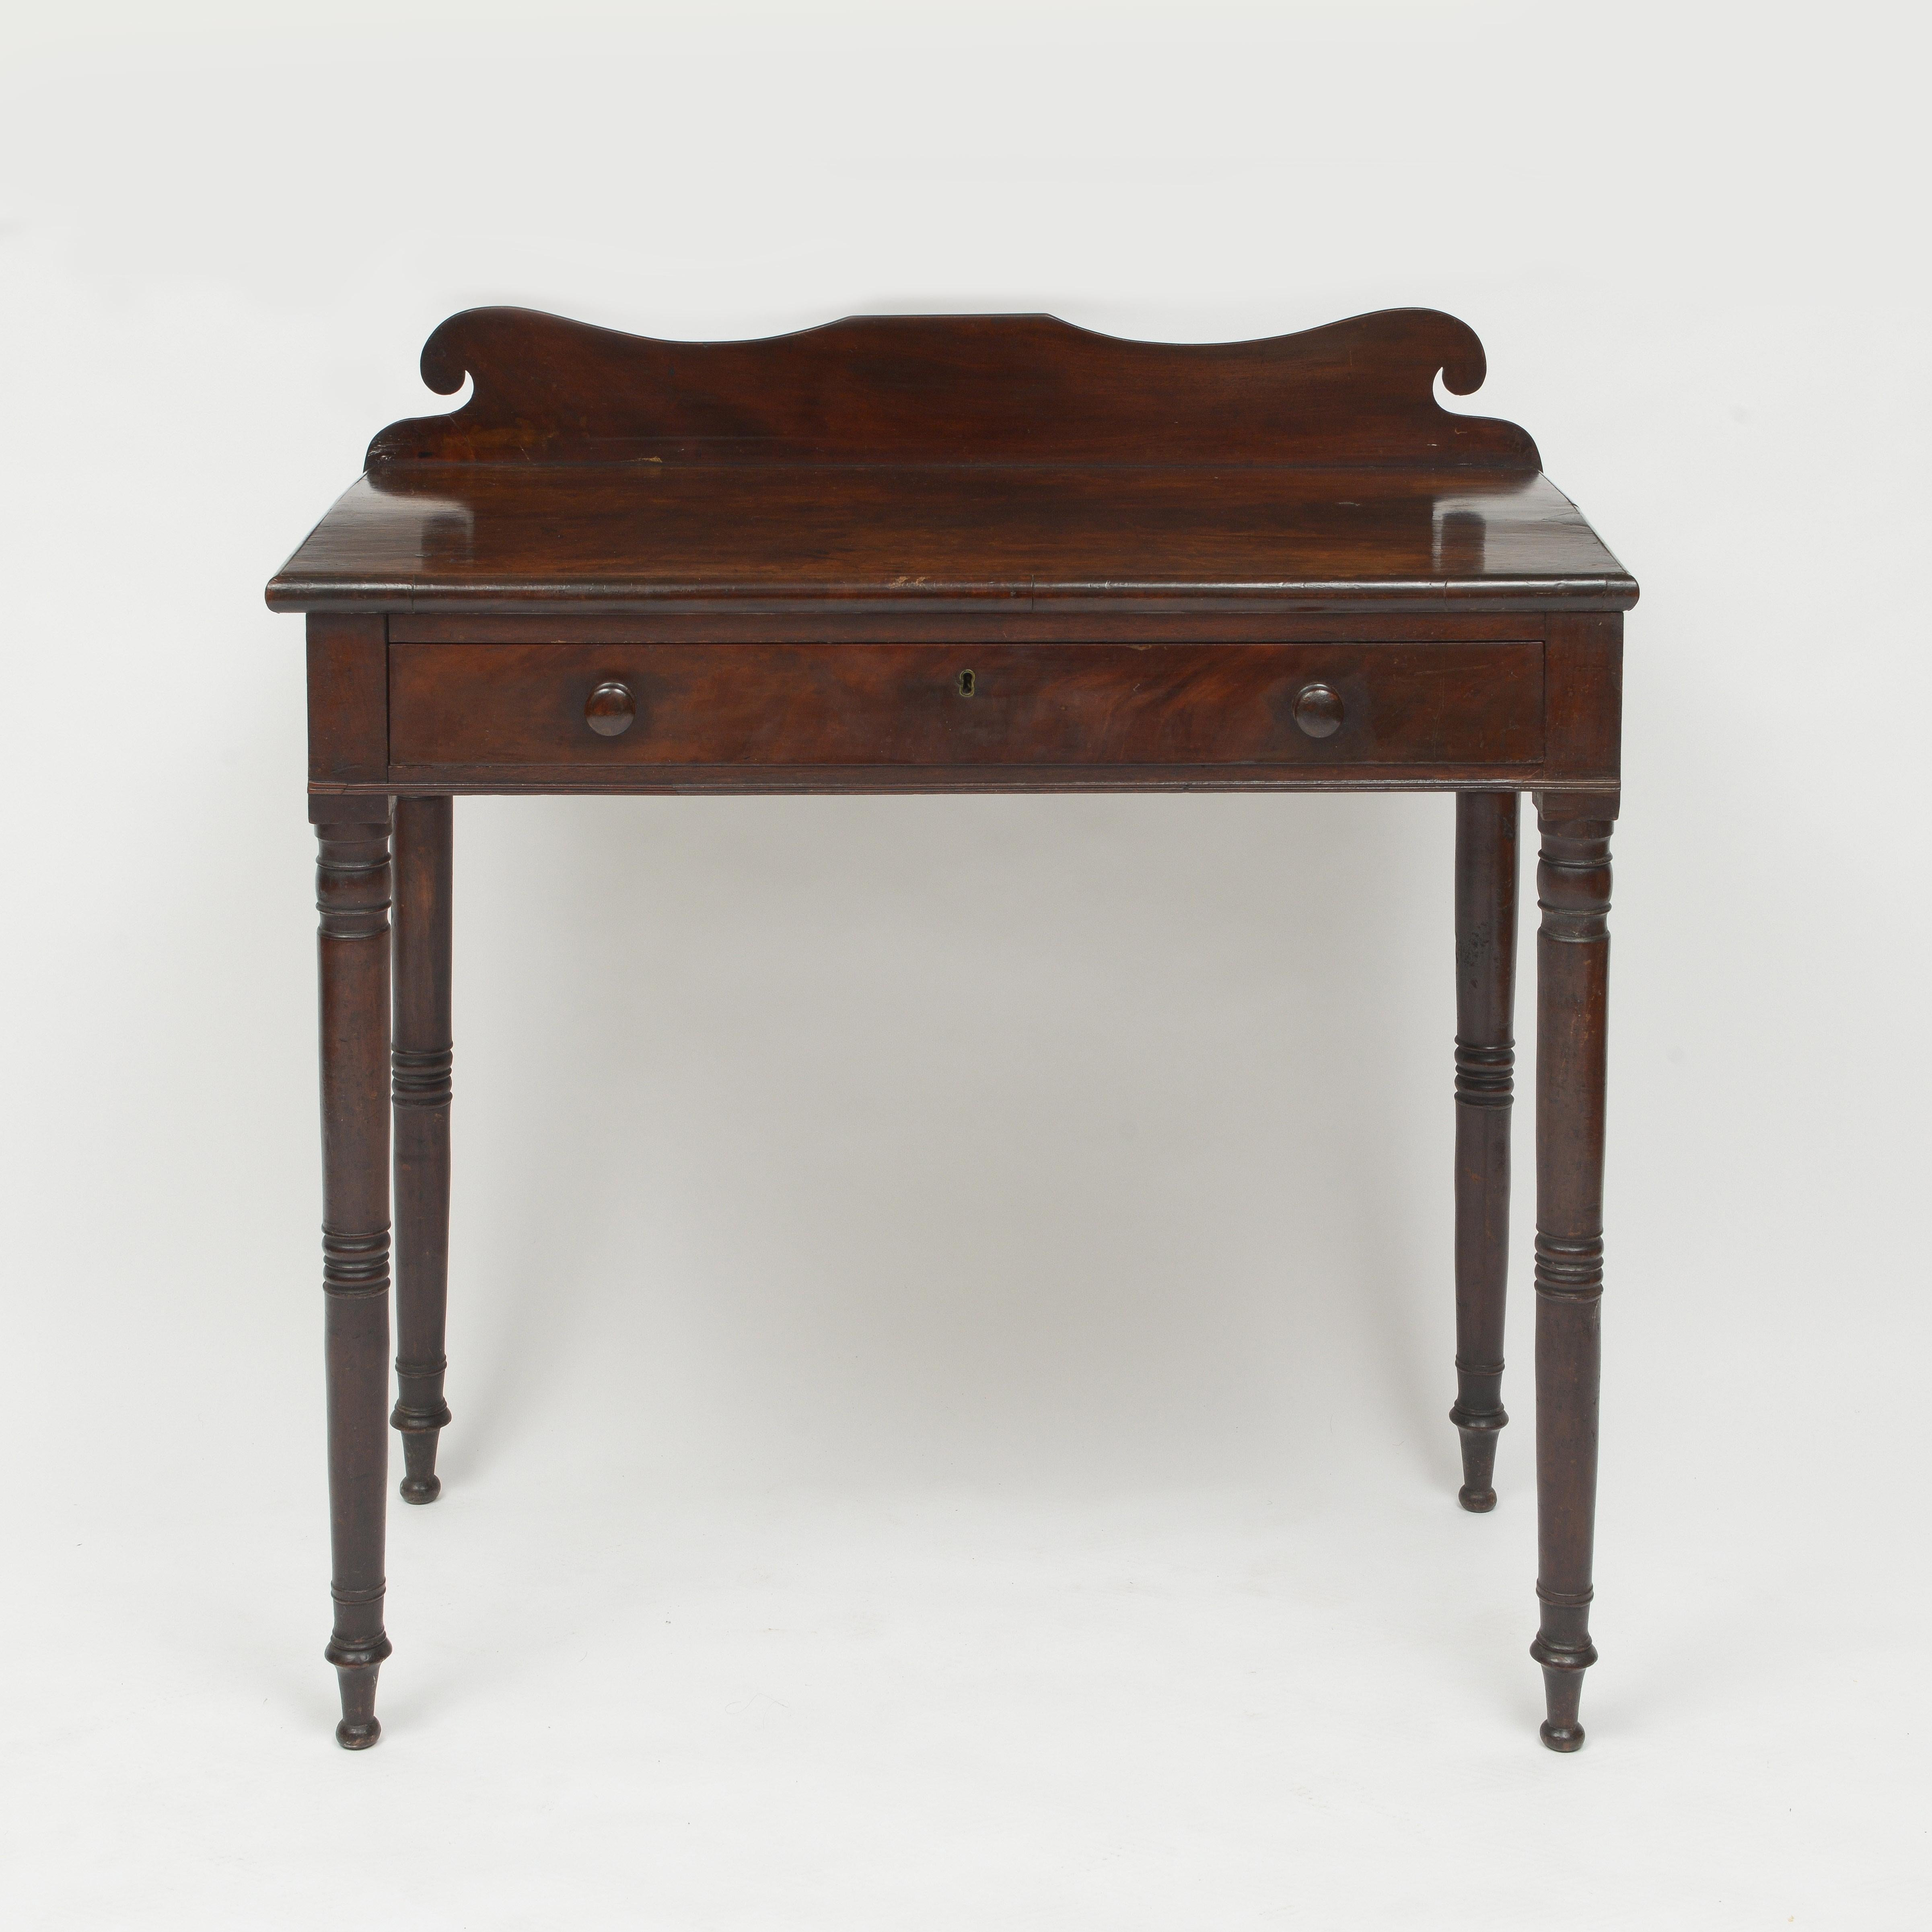 American figured walnut console table with single drawer and carved back on turned legs